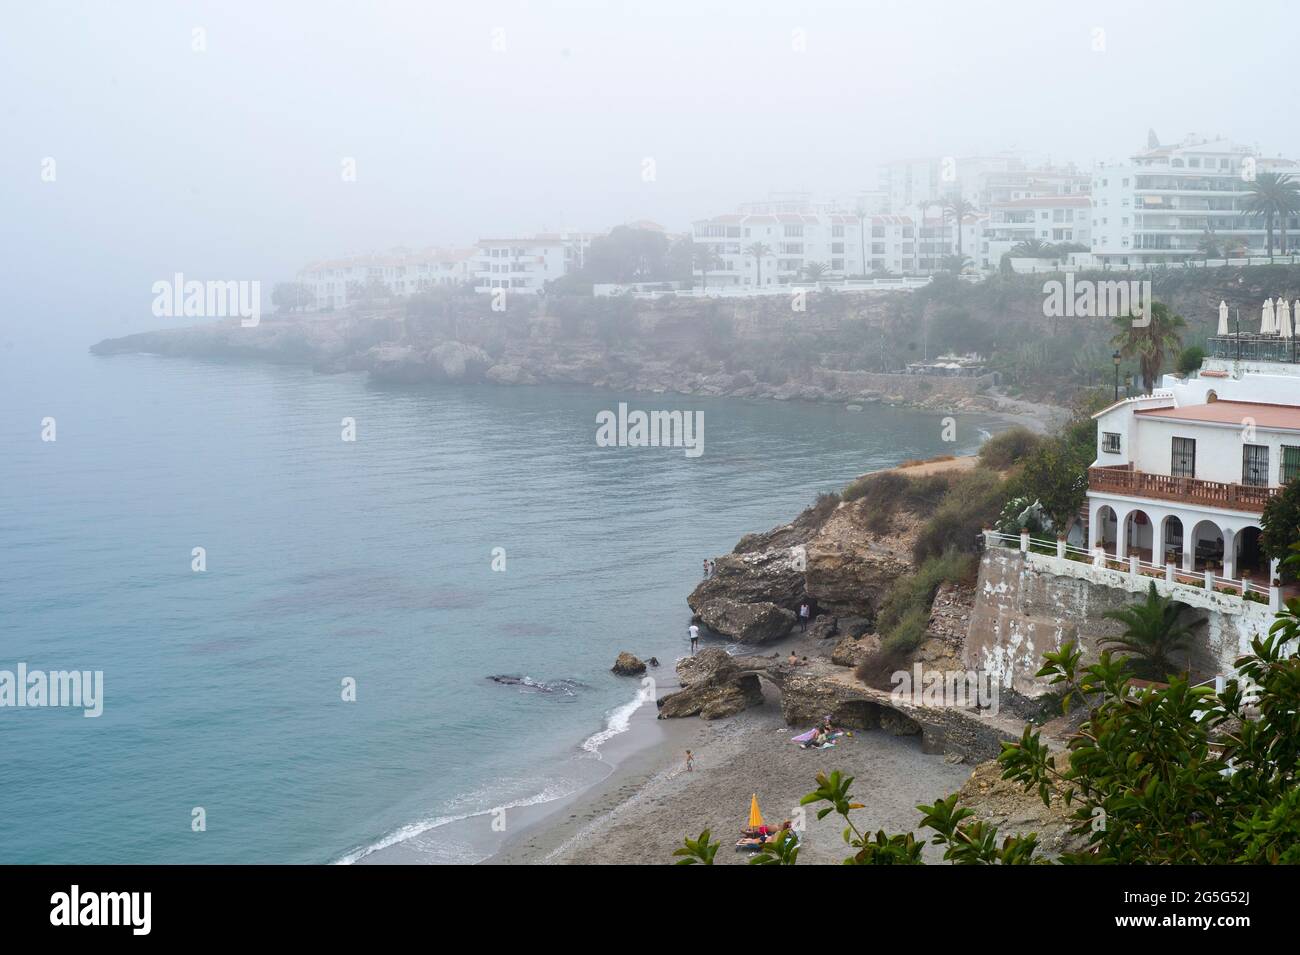 Spain Nerja High Resolution Stock Photography and Images - Alamy